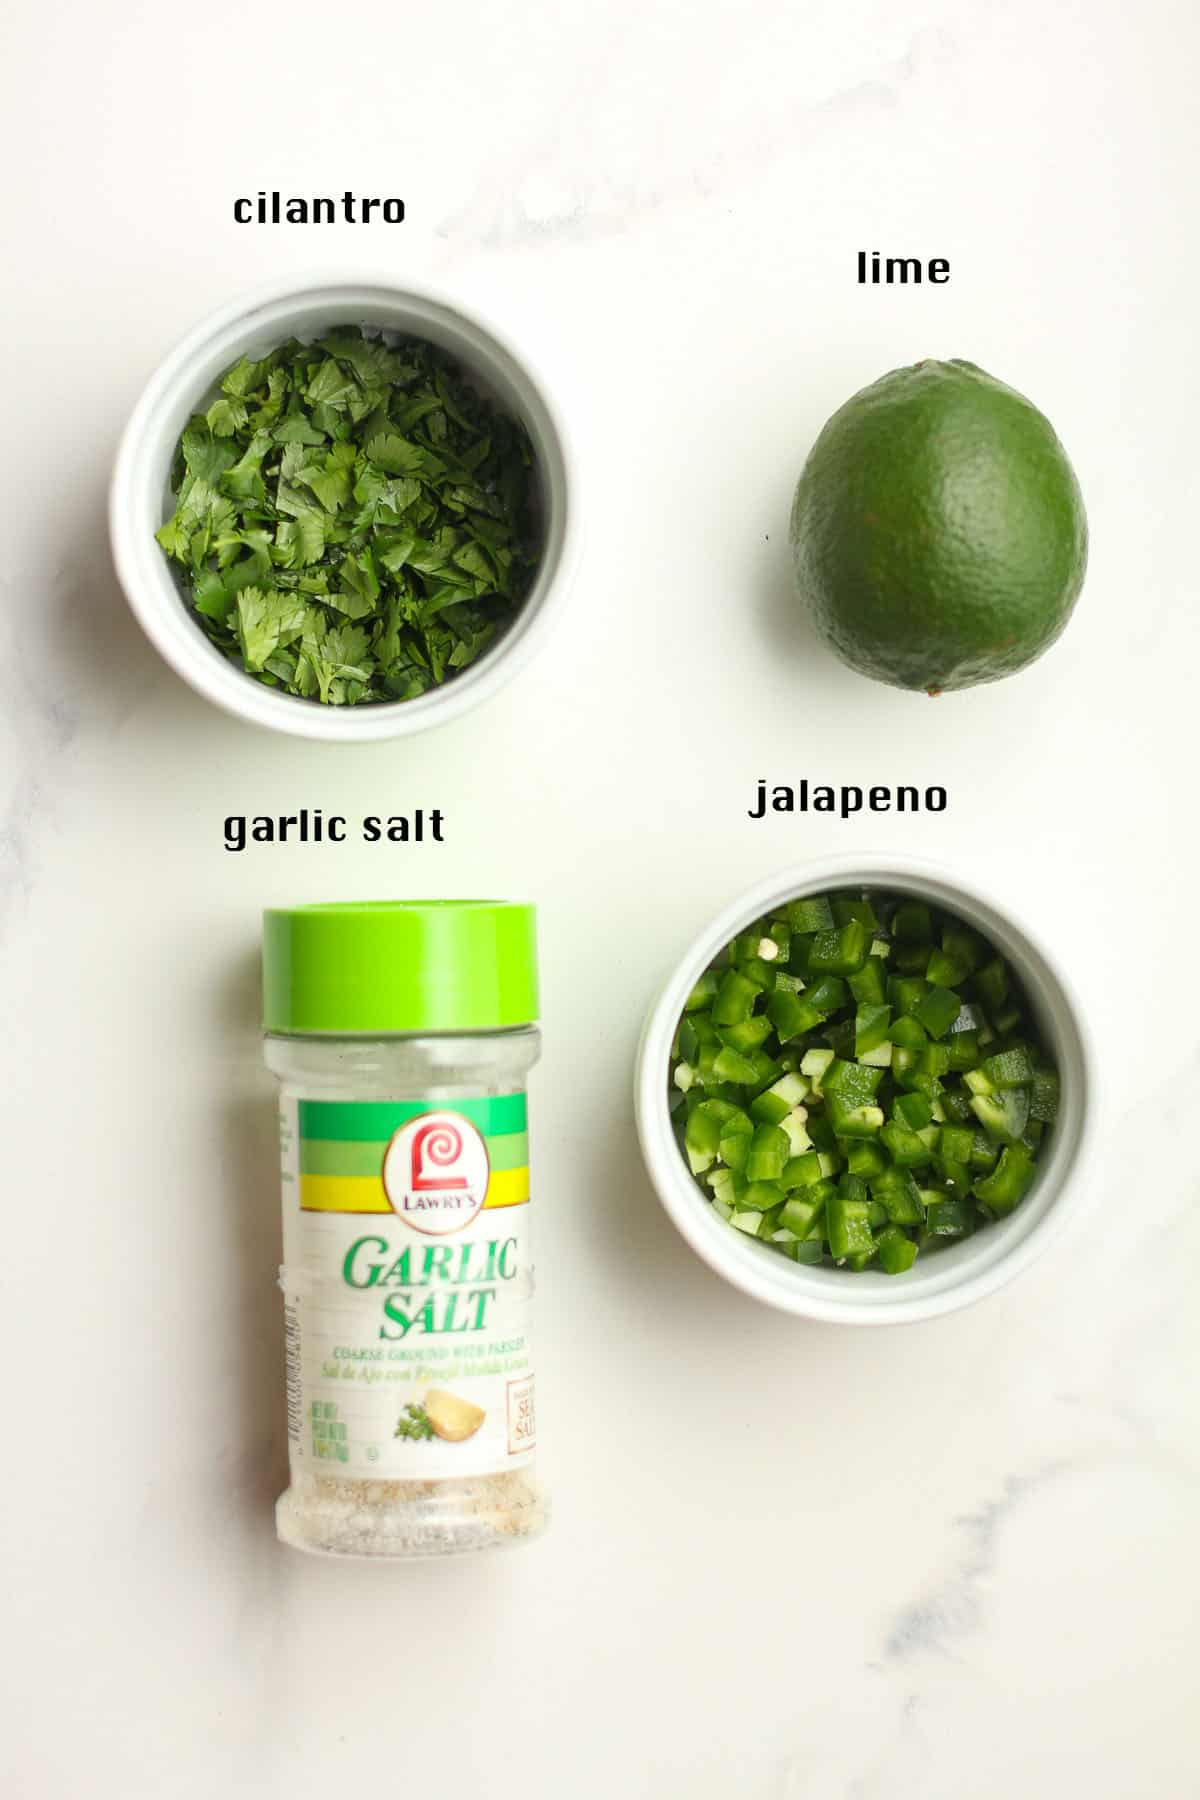 The other ingredients for the guacamole including cilantro, lime, jalapeño, and garlic salt.